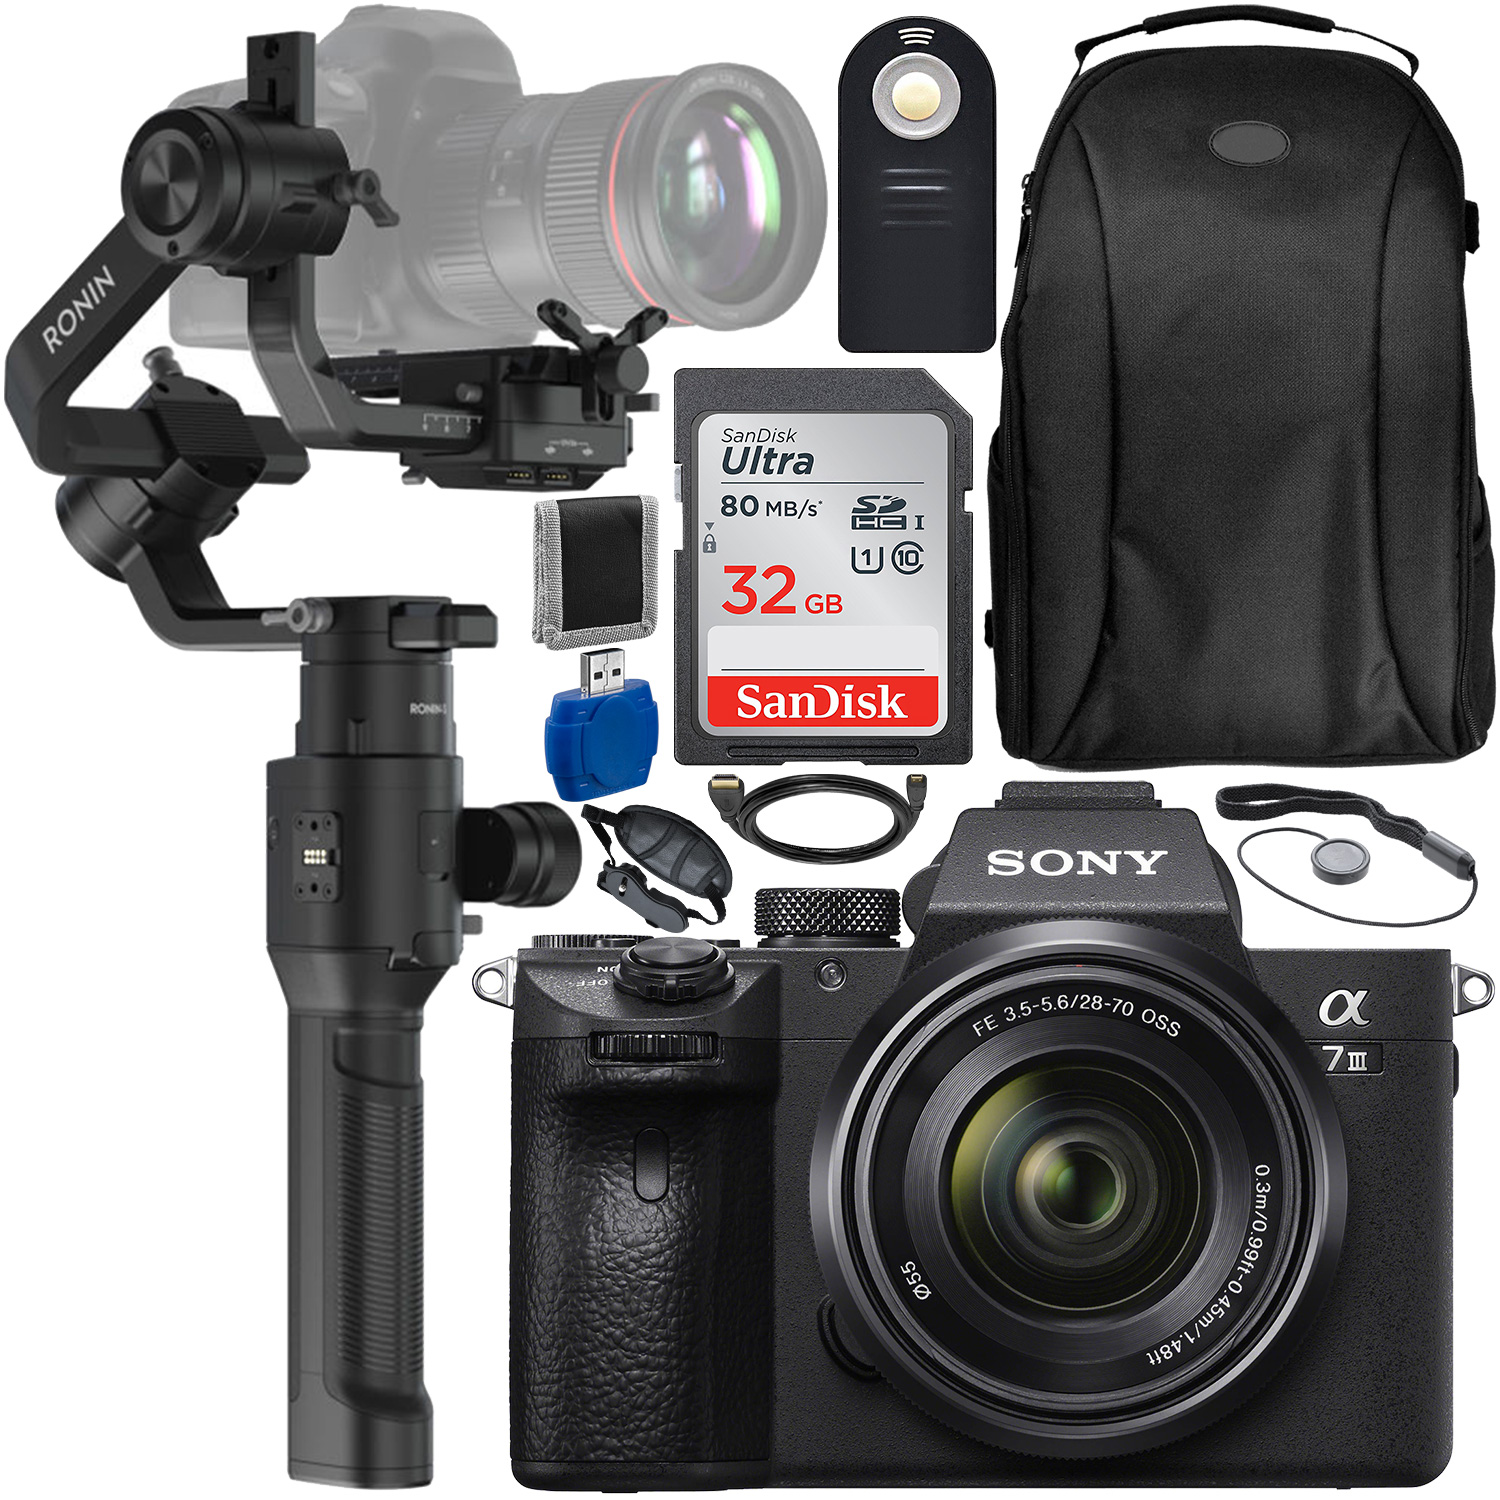 Sony Alpha a7 III Mirrorless Digital Camera with 28-70mm Lens, DJI Ronin-S and Accessory Bundle